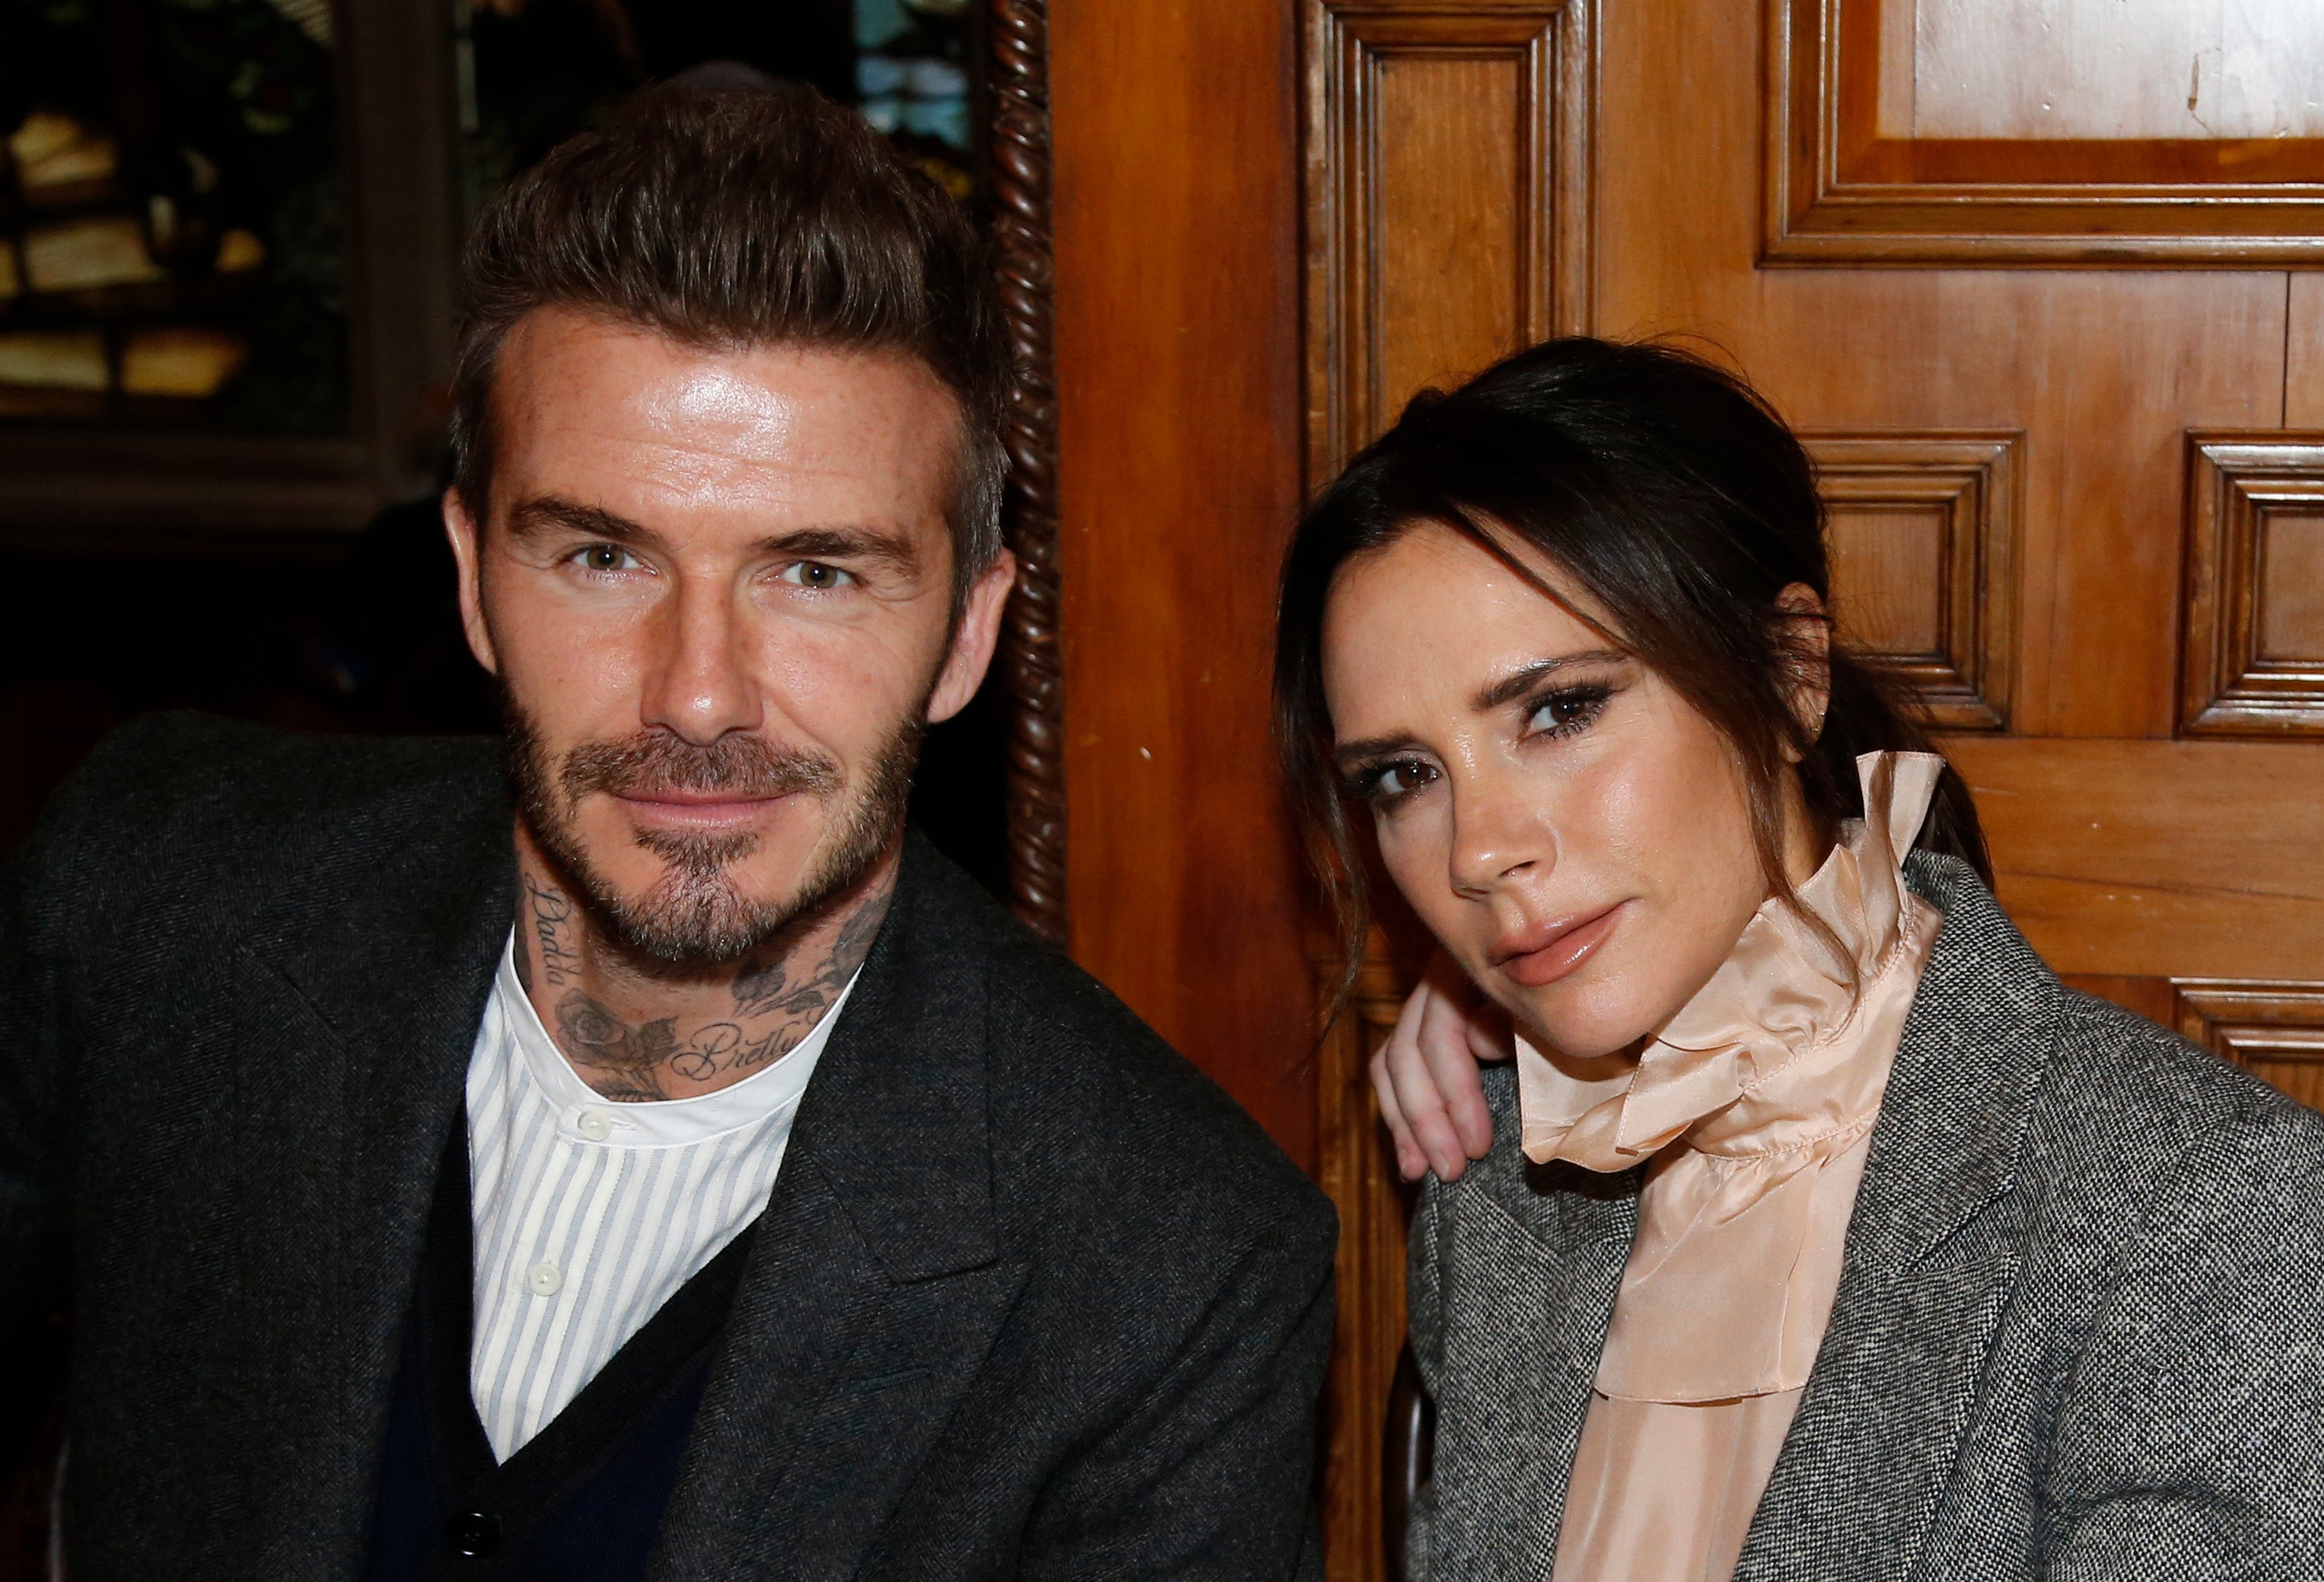 Victoria and David Beckham celebrate Valentine's Day with romantic throwback photos